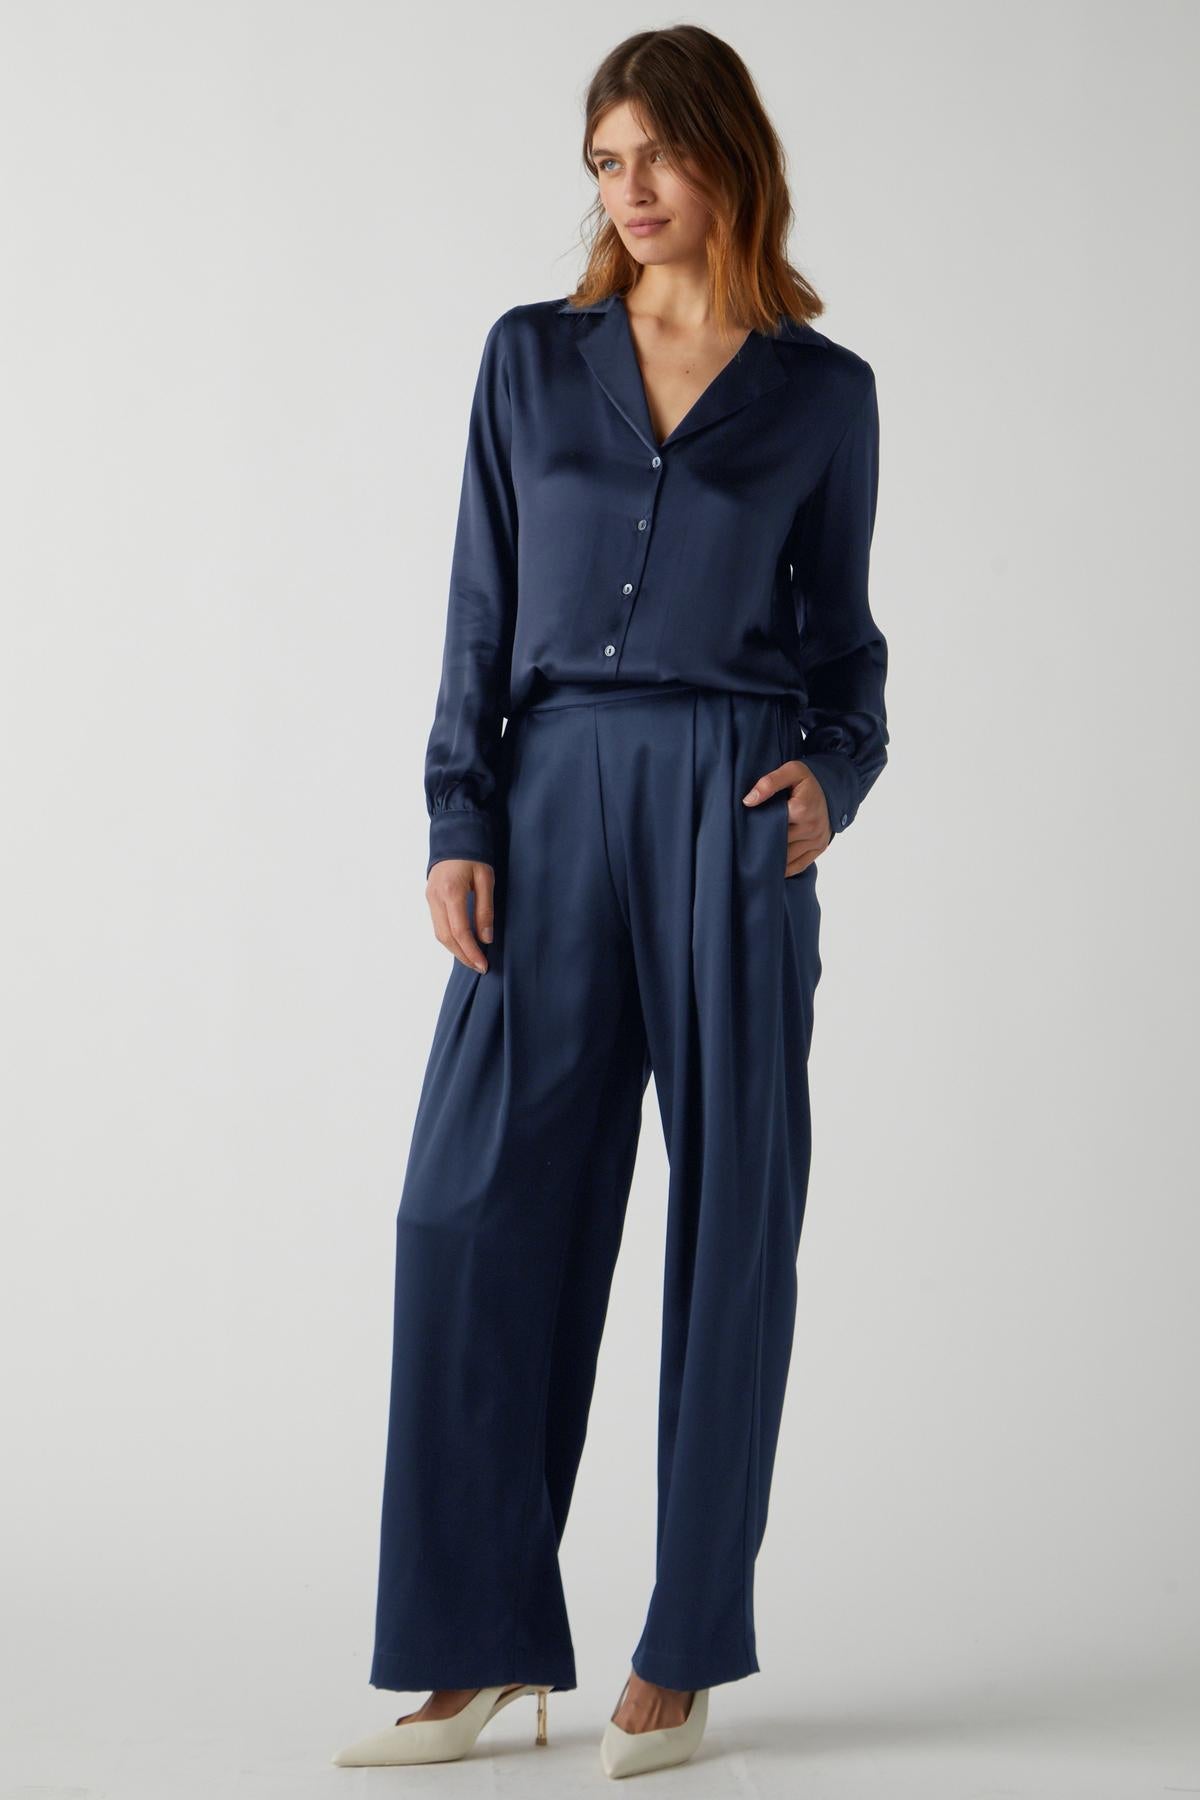 The model is wearing a Velvet by Jenny Graham MANHATTAN PANT jumpsuit for an elegant evening look.-36594676433089